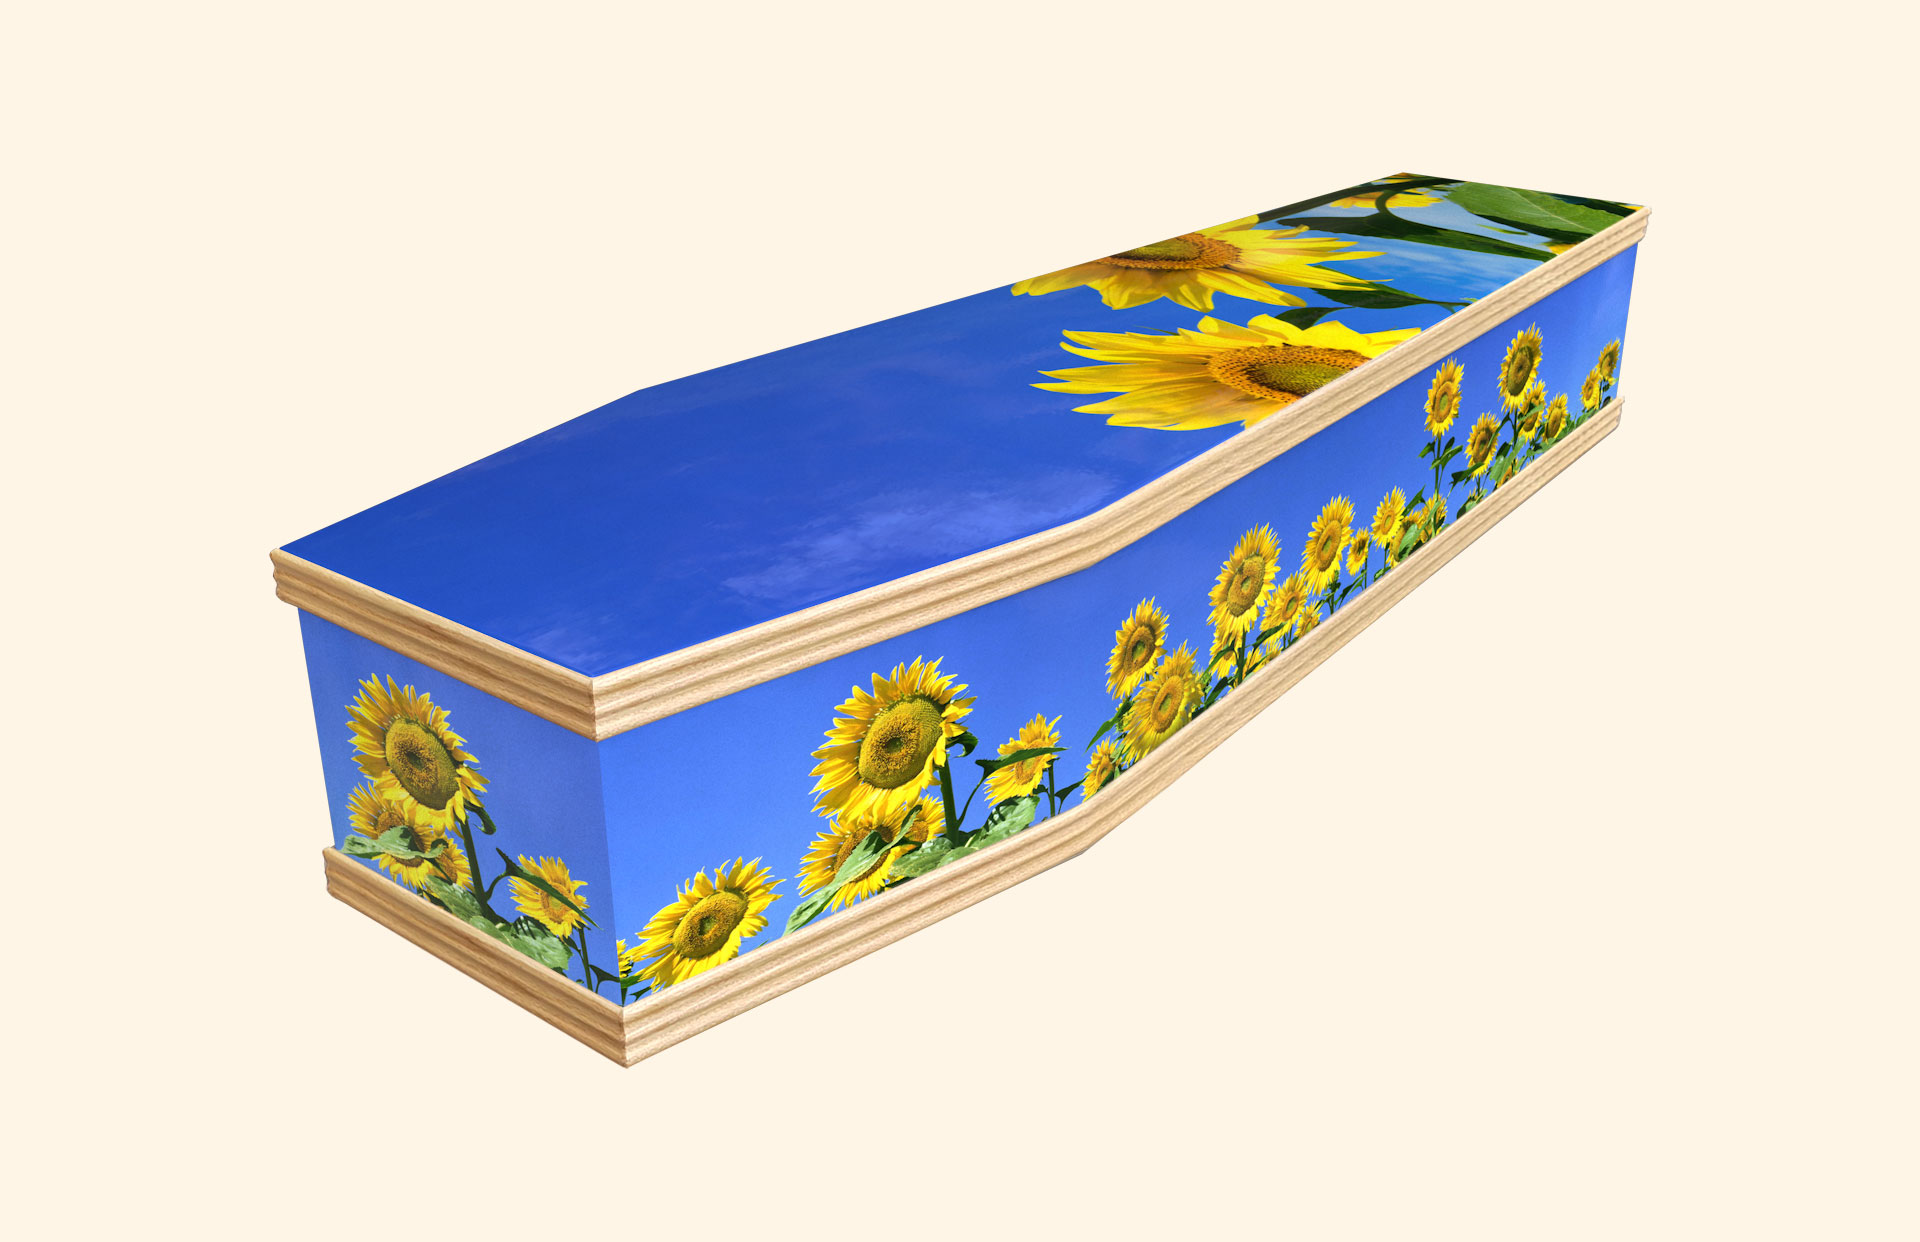 Sunflower Delight design on a classic coffin